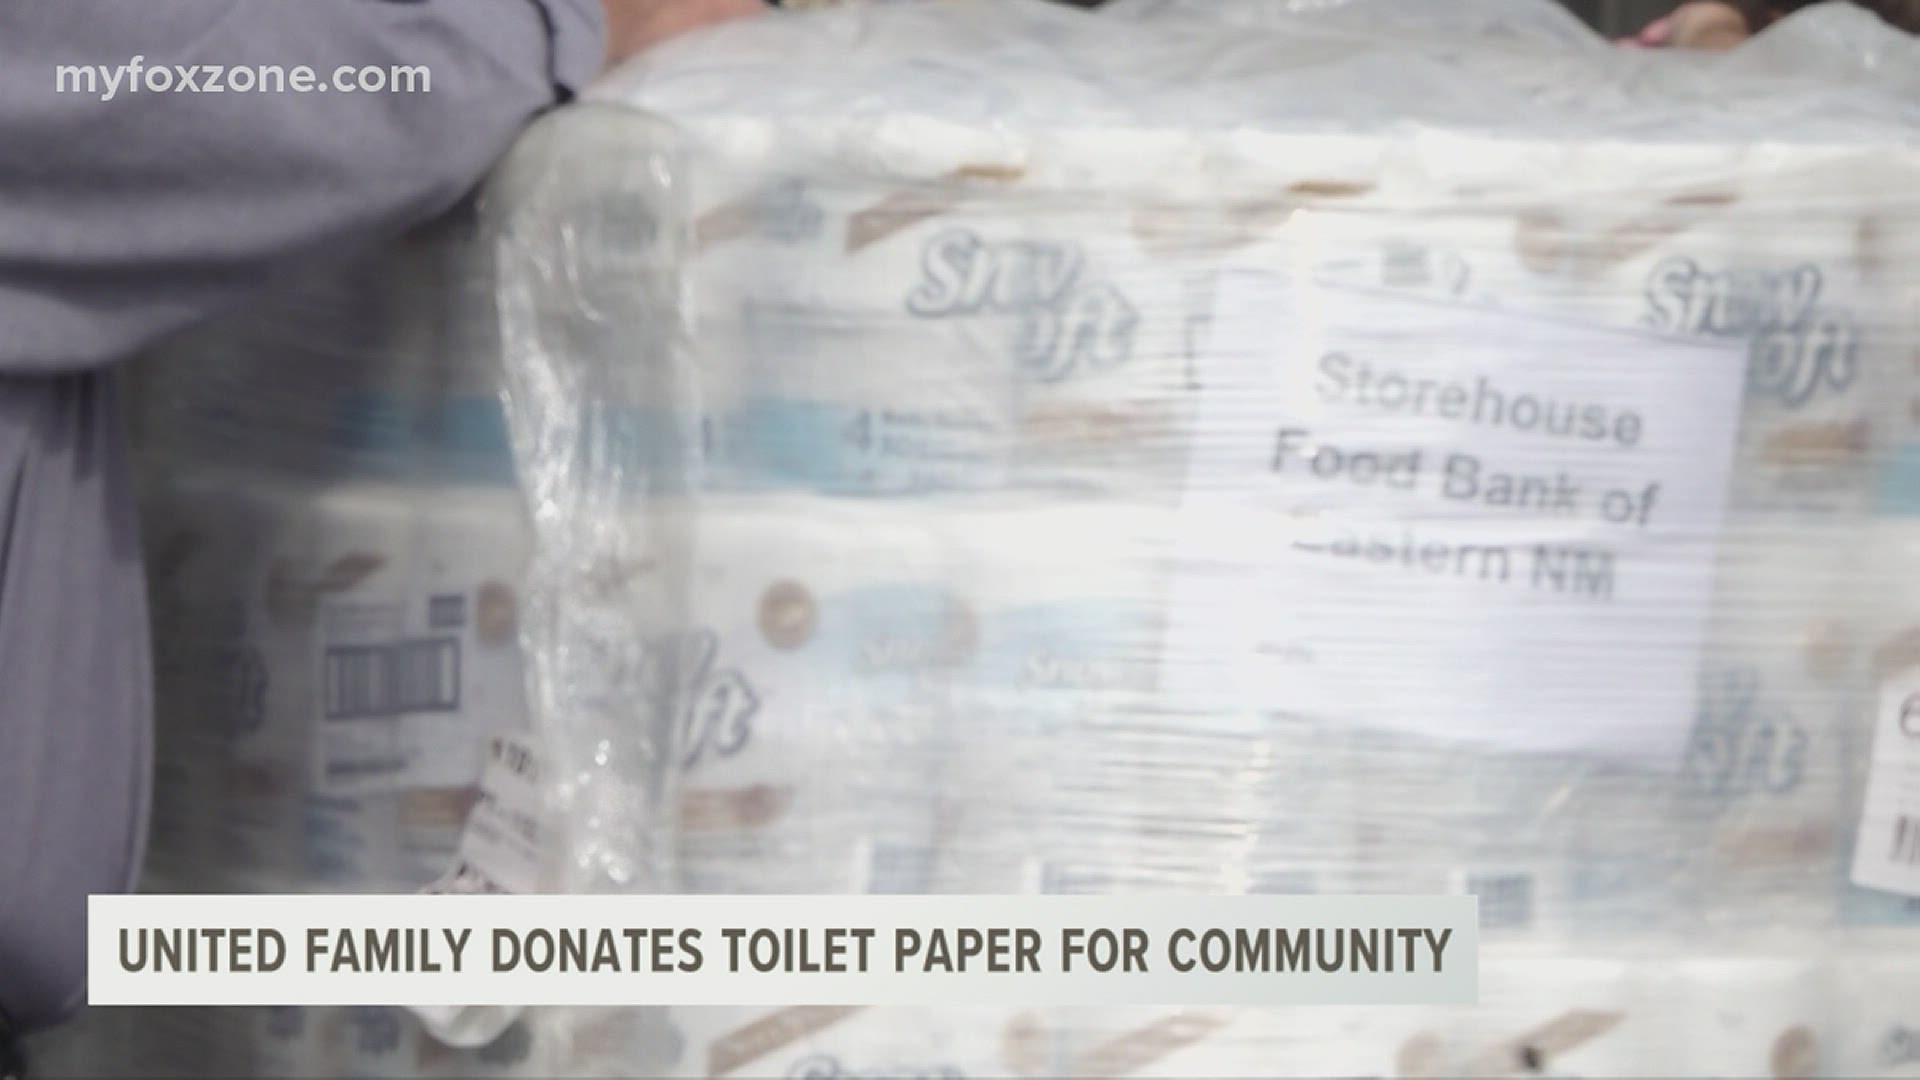 The United Family donated a whopping 9,000 rolls of toilet paper.